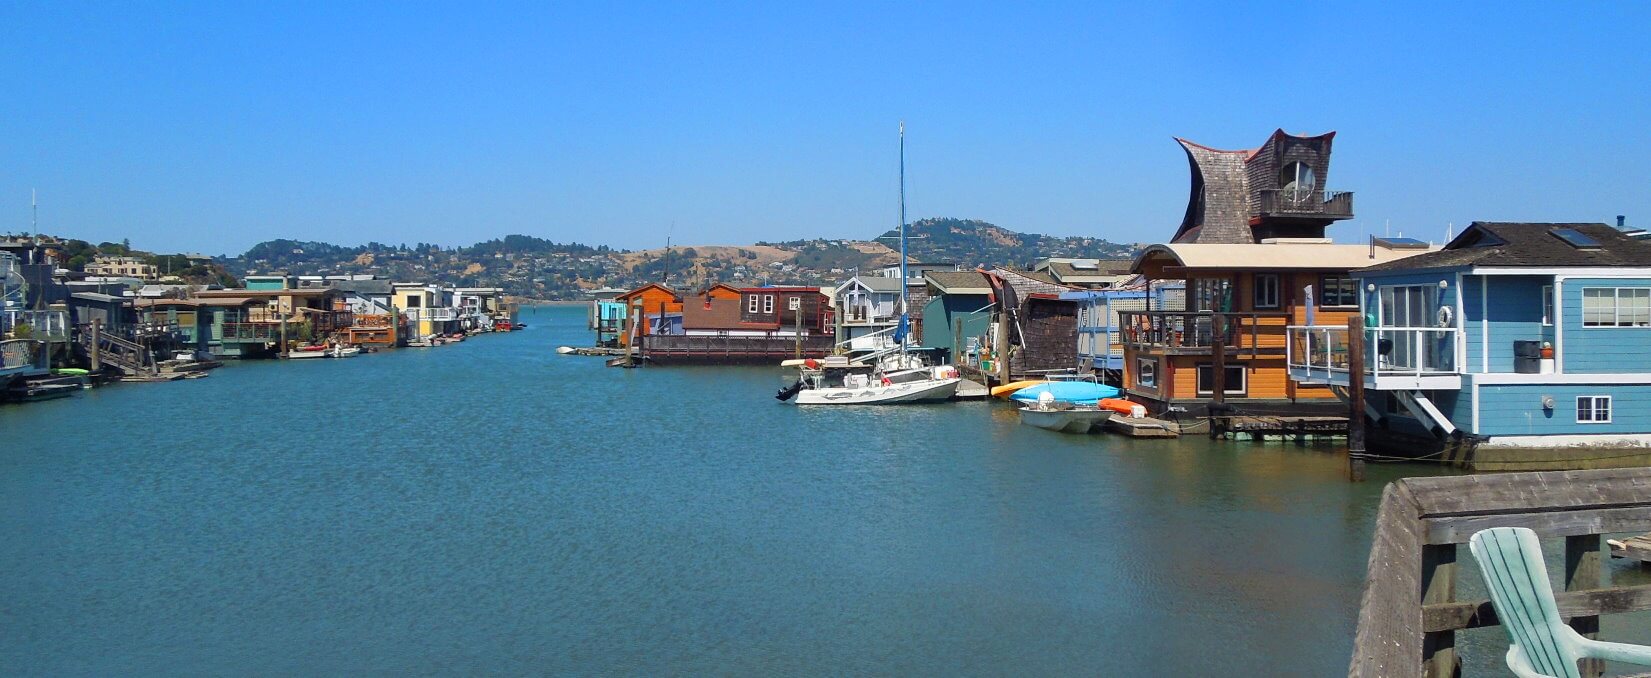 Sausalito House Boats Floating Homes  Guided Tour from San Francisco Trip Advisor